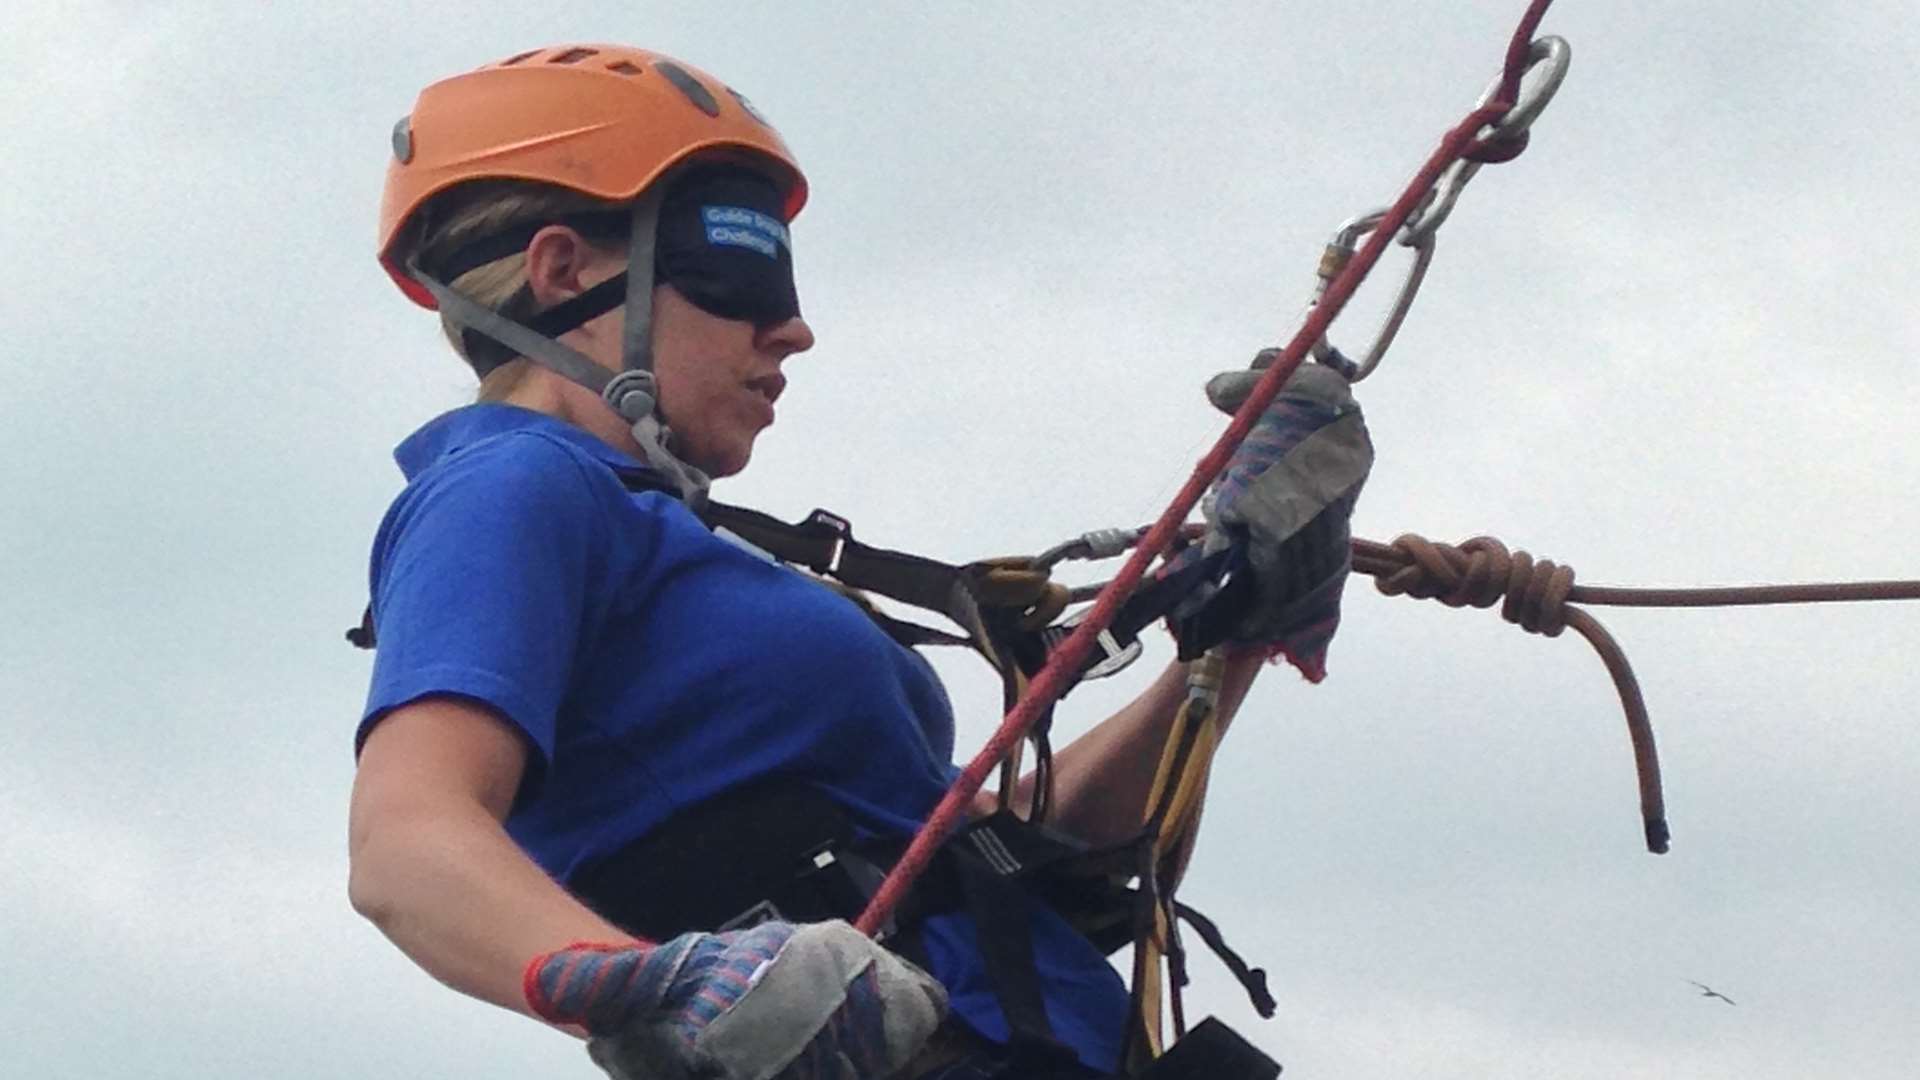 Cassie Moss of Maidstone dons a blindfold before abseiling for Guide Dogs for the Blind at the KM abseil in Folkestone.